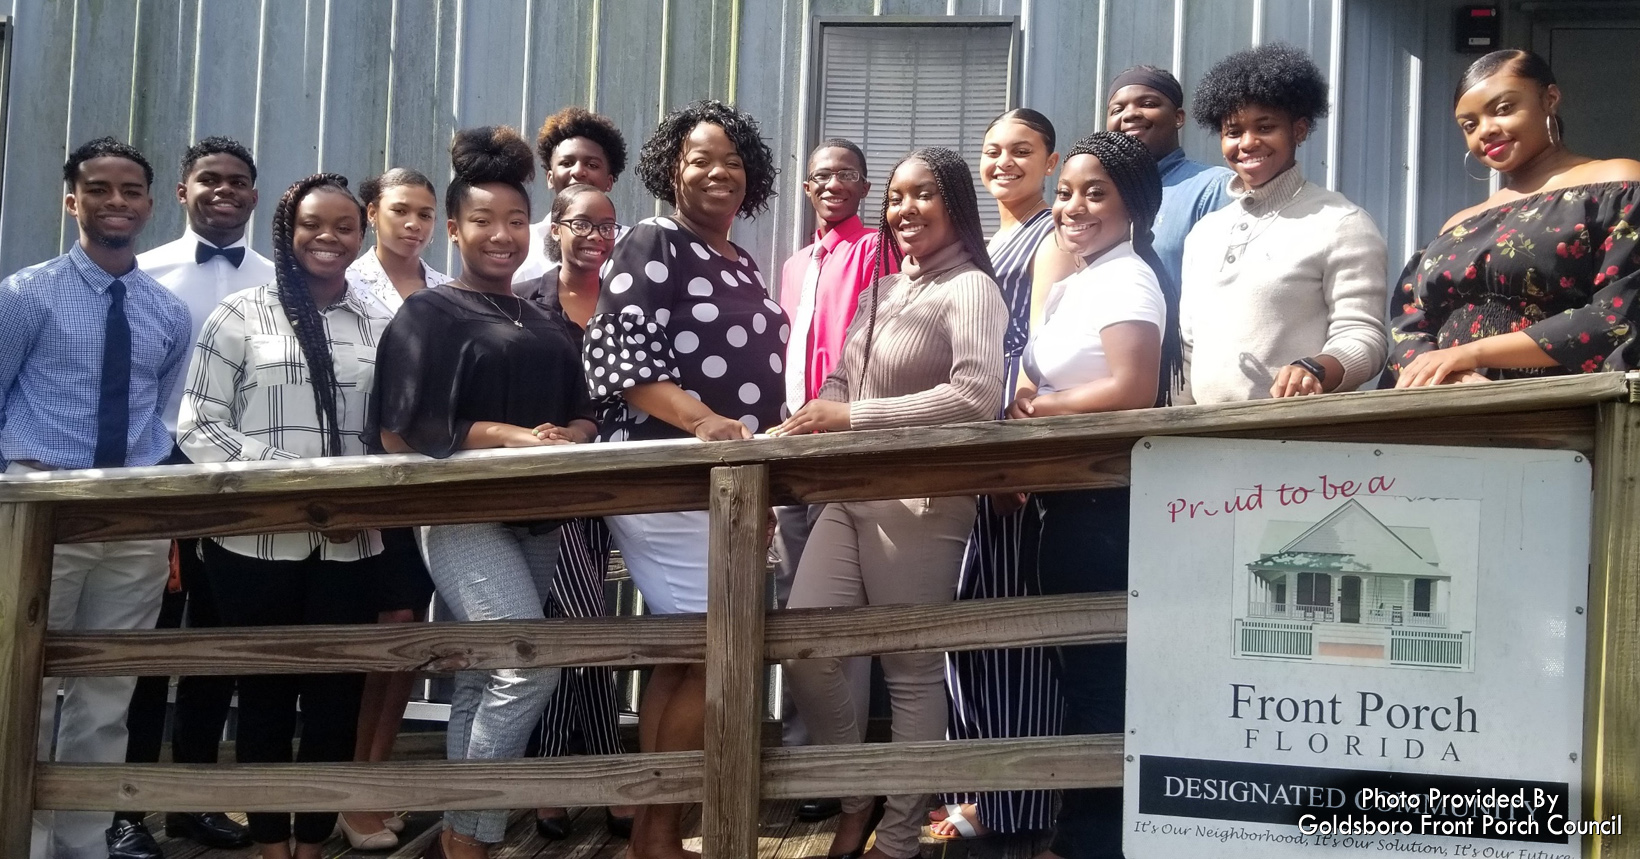 During the summer the students enroll in a paid internship program. In the summer of 2019, the students began the Youth Empowerment Leadership Development Academy program. The program is 8-weeks that focuses on helping the students to be career focused and be financially responsible.